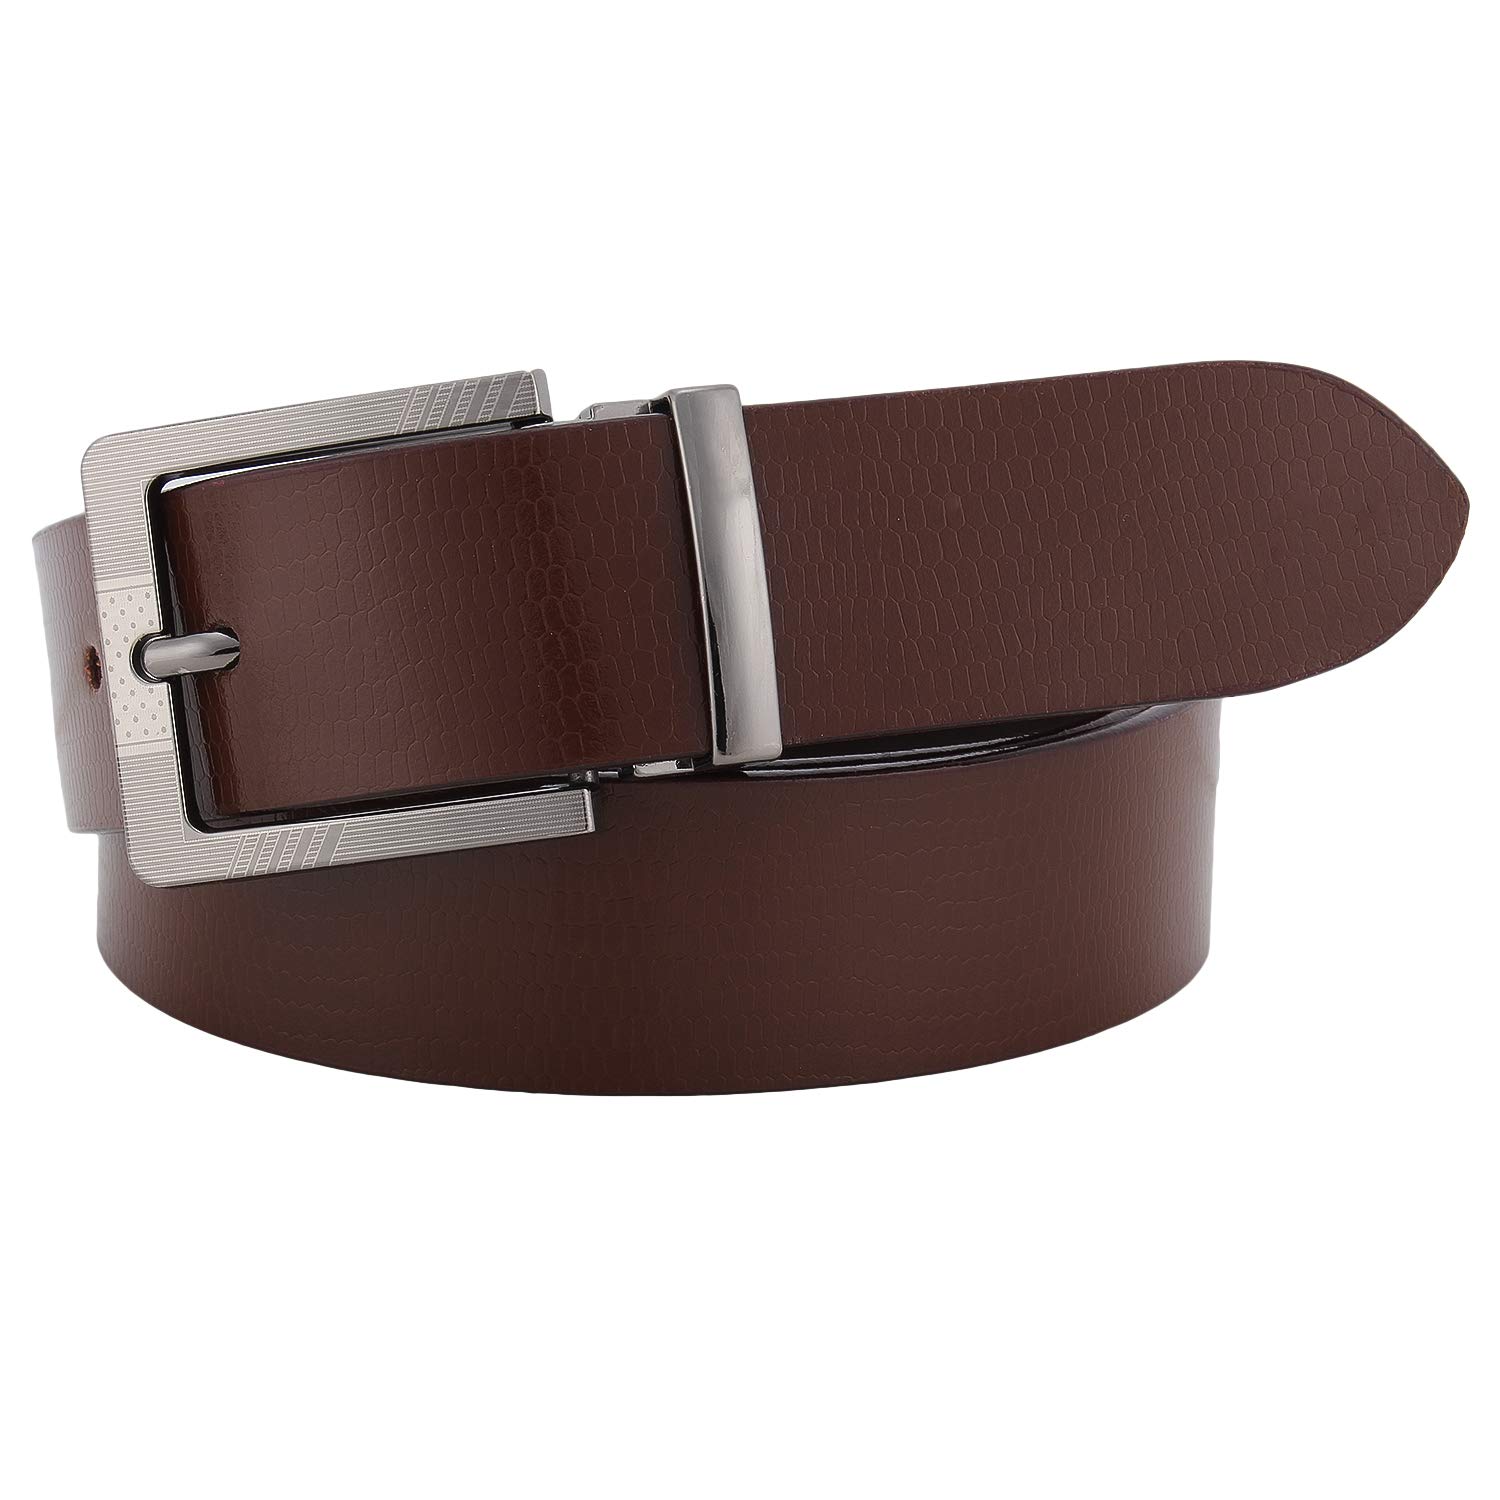 Leather Belt Manufacturers in Usa, Leather Belt Suppliers Buyers ...